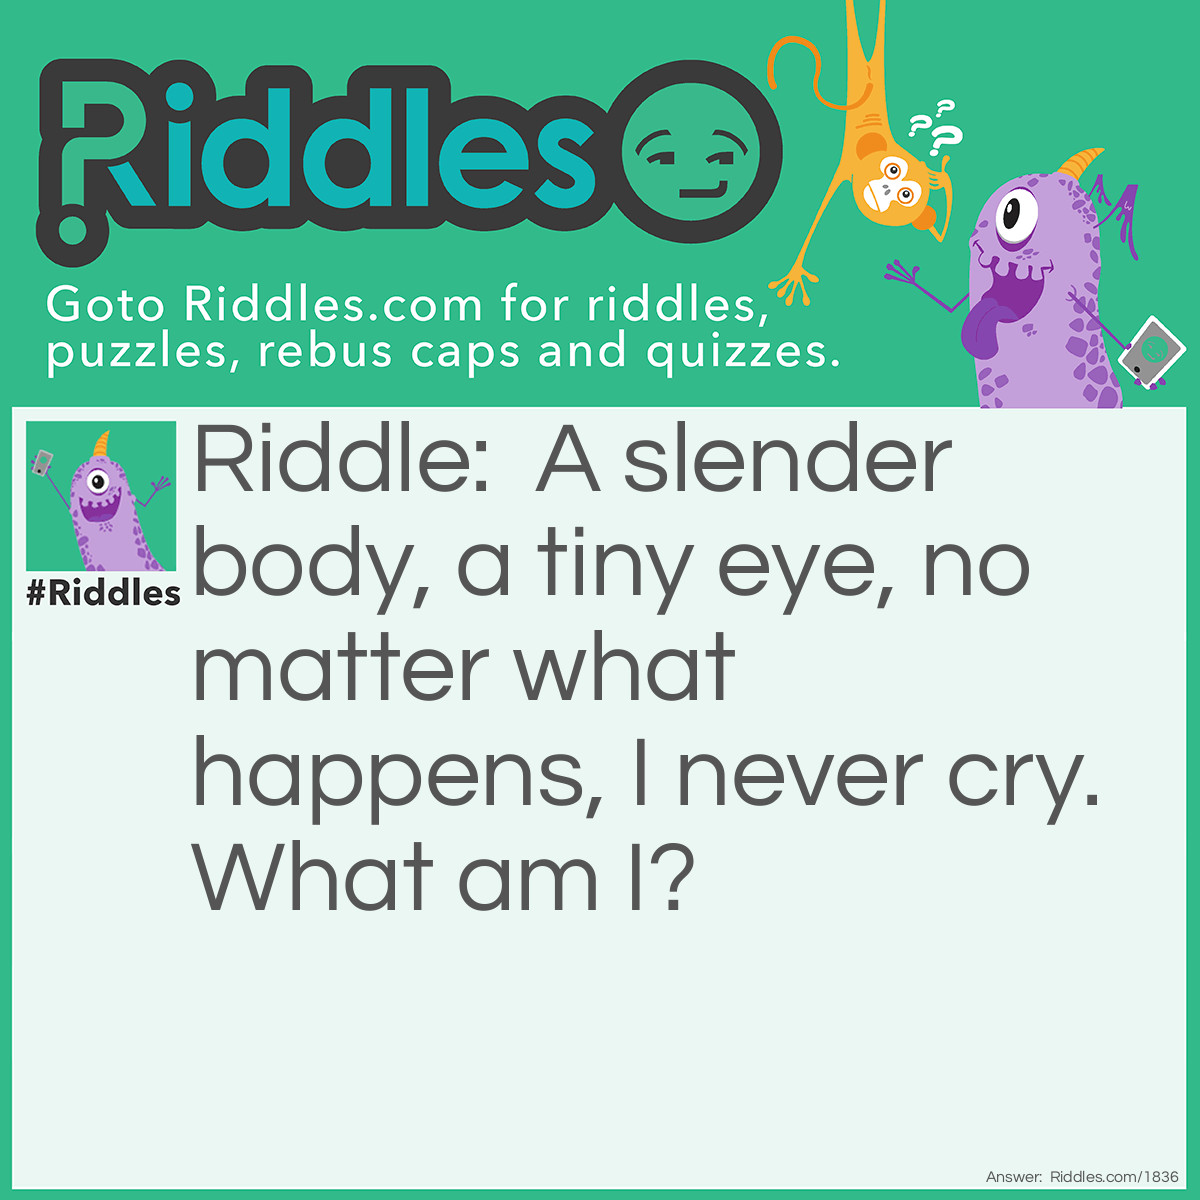 Riddle: A slender body, a tiny eye, no matter what happens, I never cry. What am I? Answer: A needle.